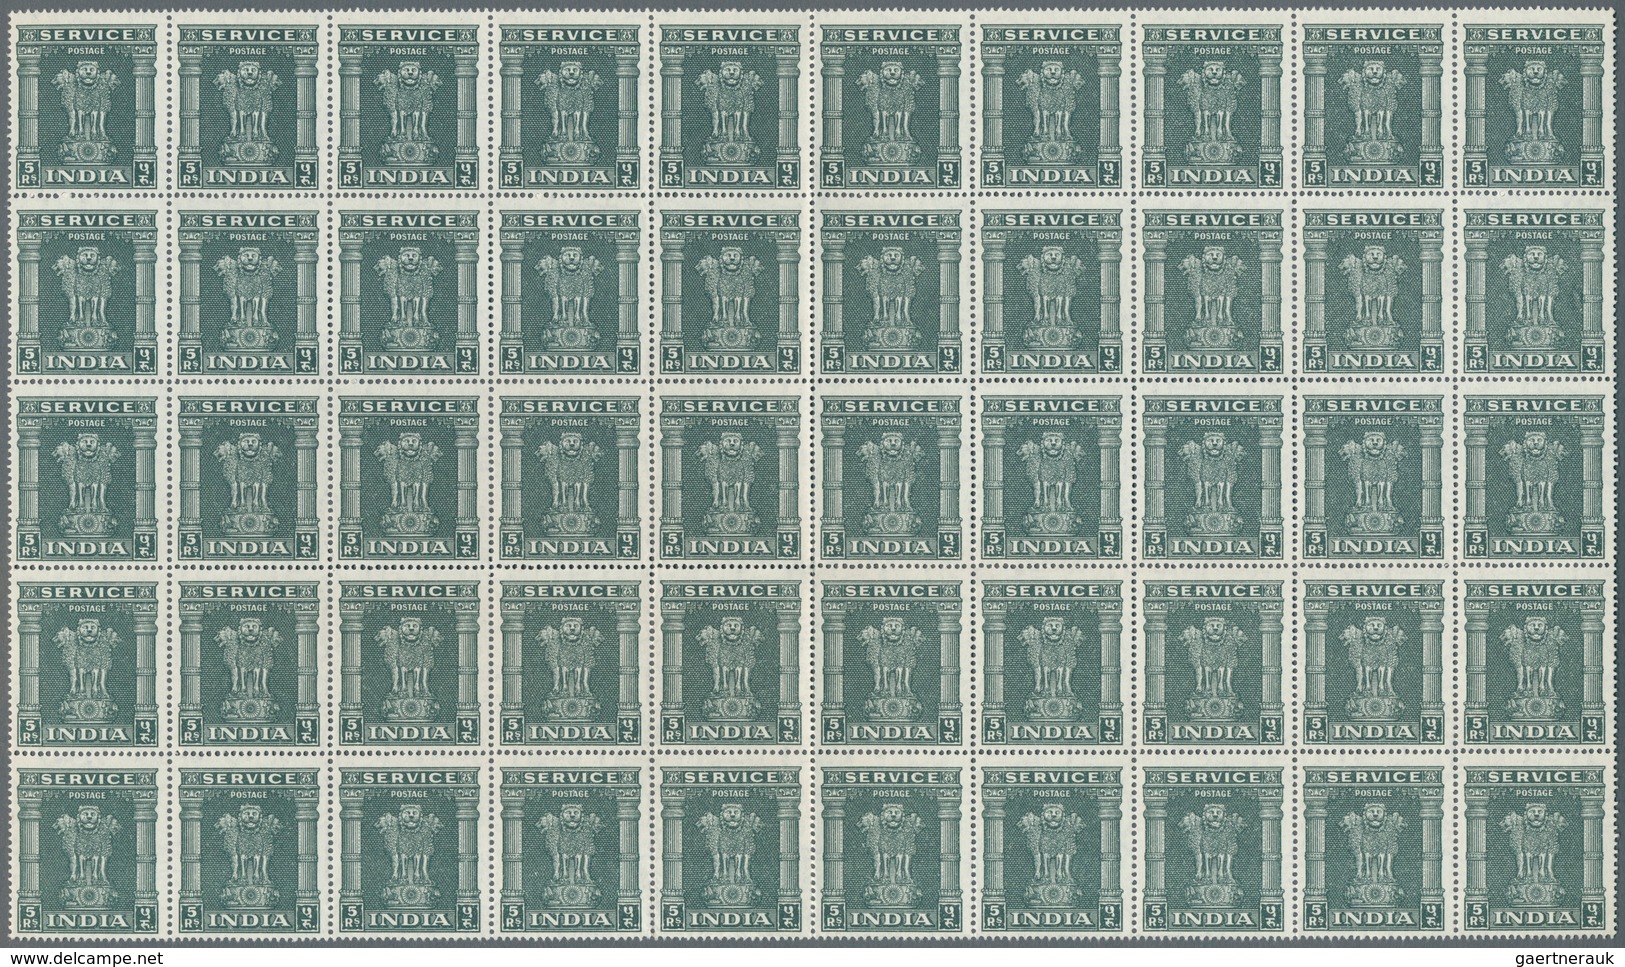 08752 Indien - Dienstmarken: 1950, 2, 5 and 10 Rupies, sheetparts with totally 200 of each value, mnh, CV